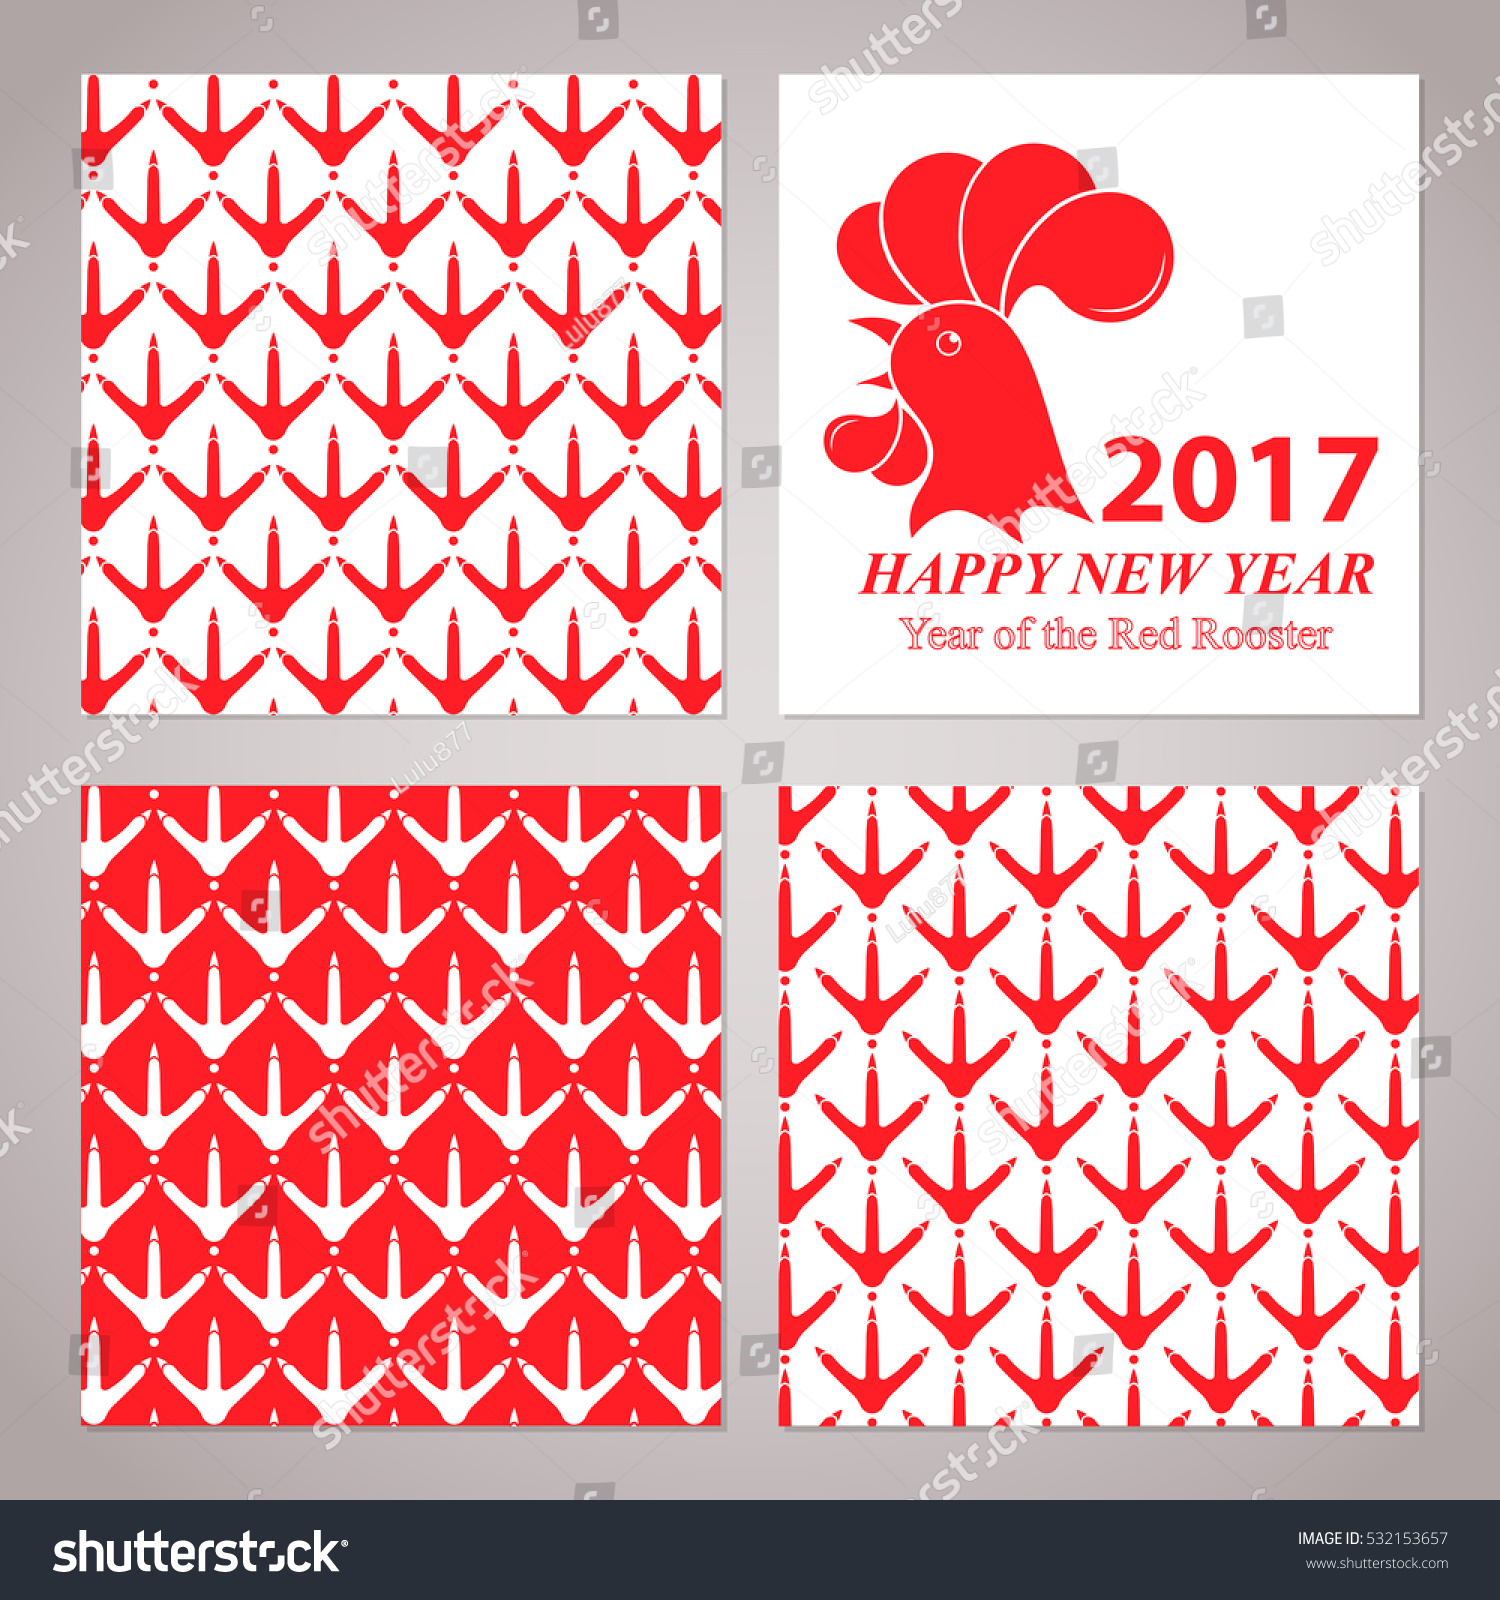 SVG of Greeting card for the New Year 2017. Red rooster on white background. Set of seamless patterns with chicken footprints svg